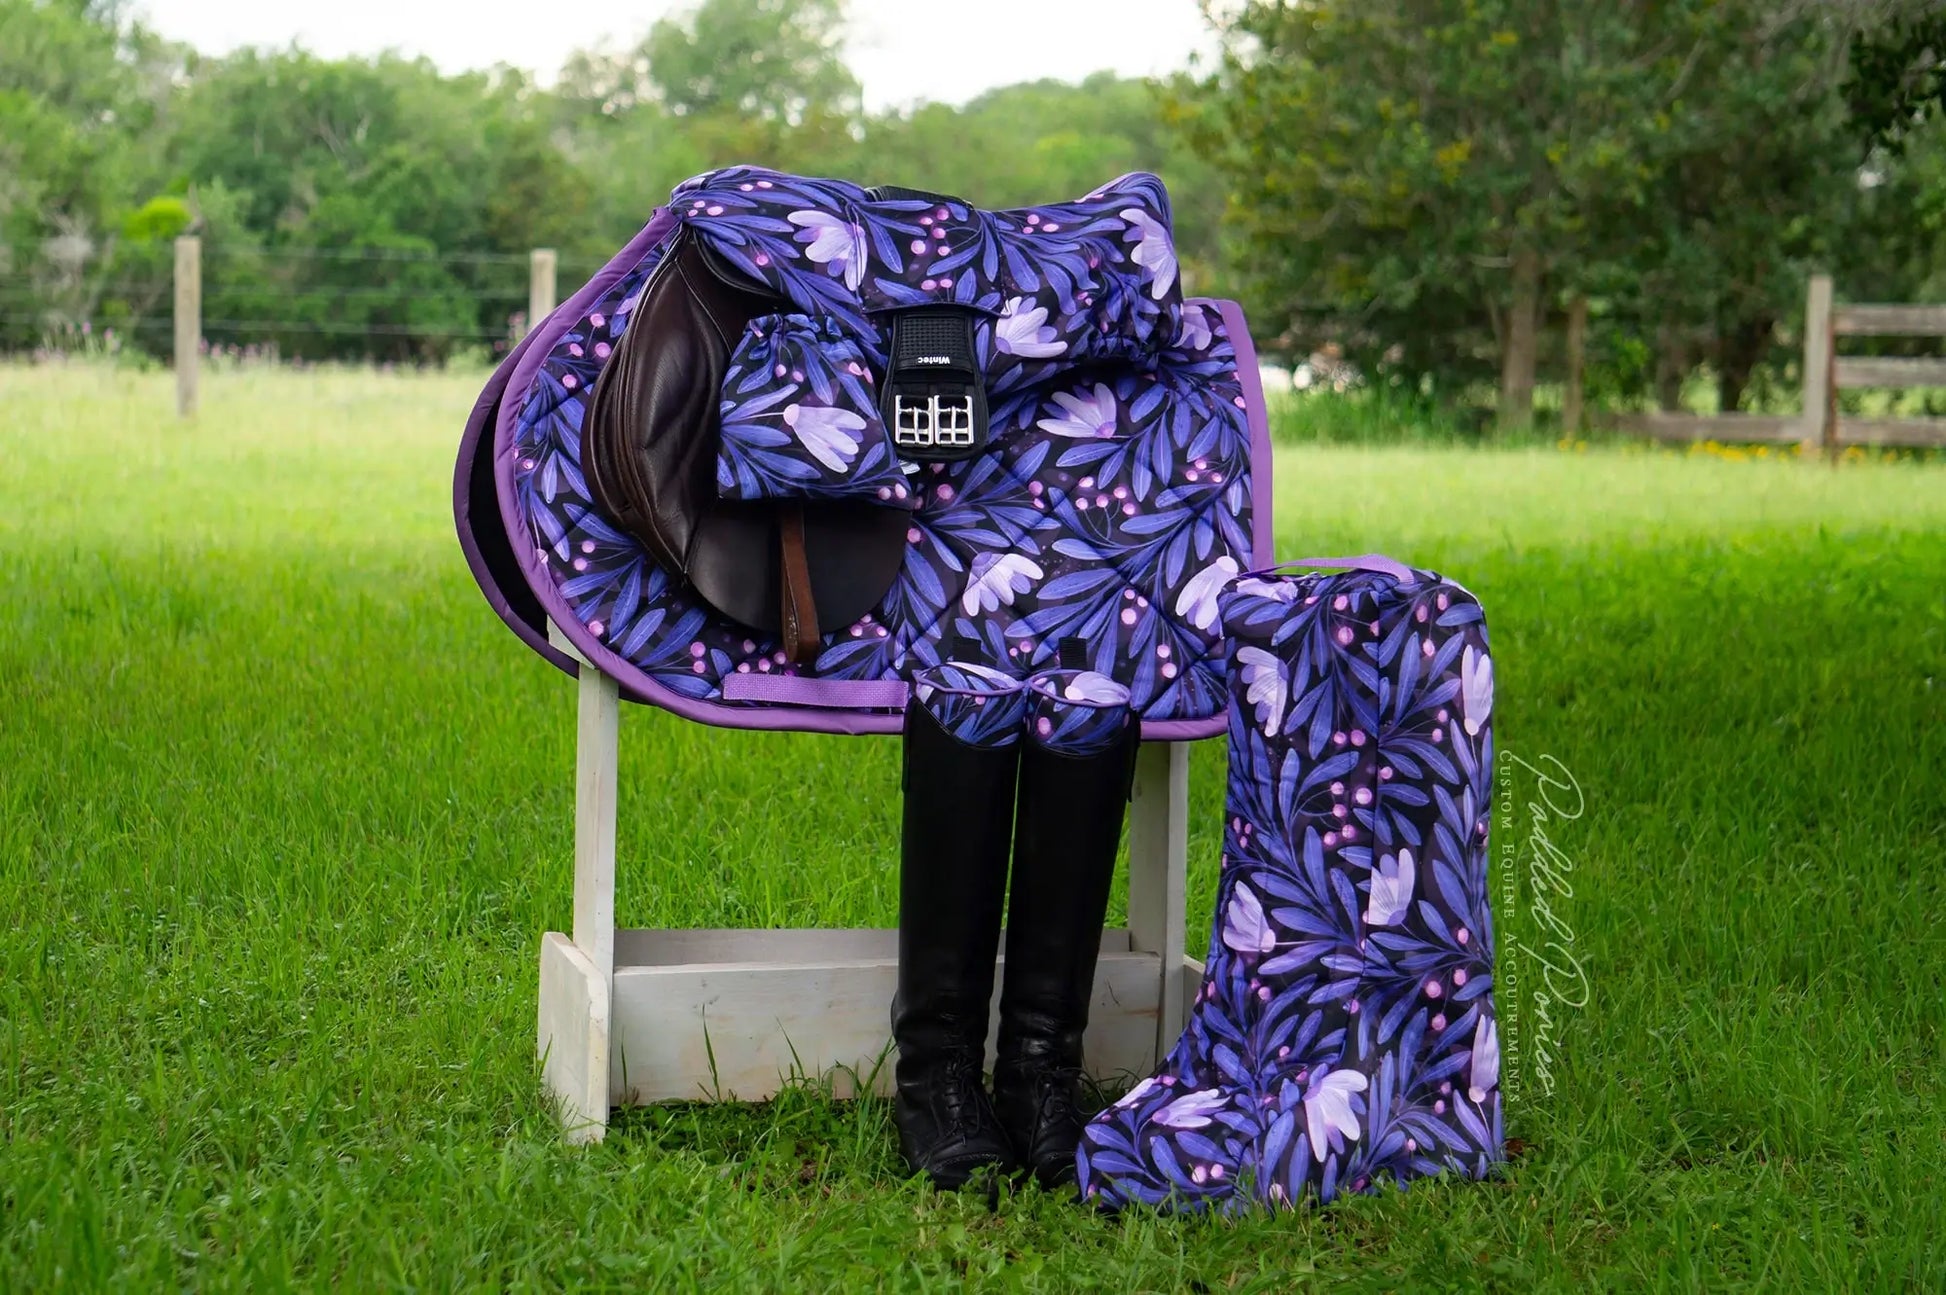 Purple Indigo Lavender Moonflowers Floral All Purpose Saddle Cover with Matching Stirrup Covers, Saddle Pad, Boot Trees, and Boot Bag